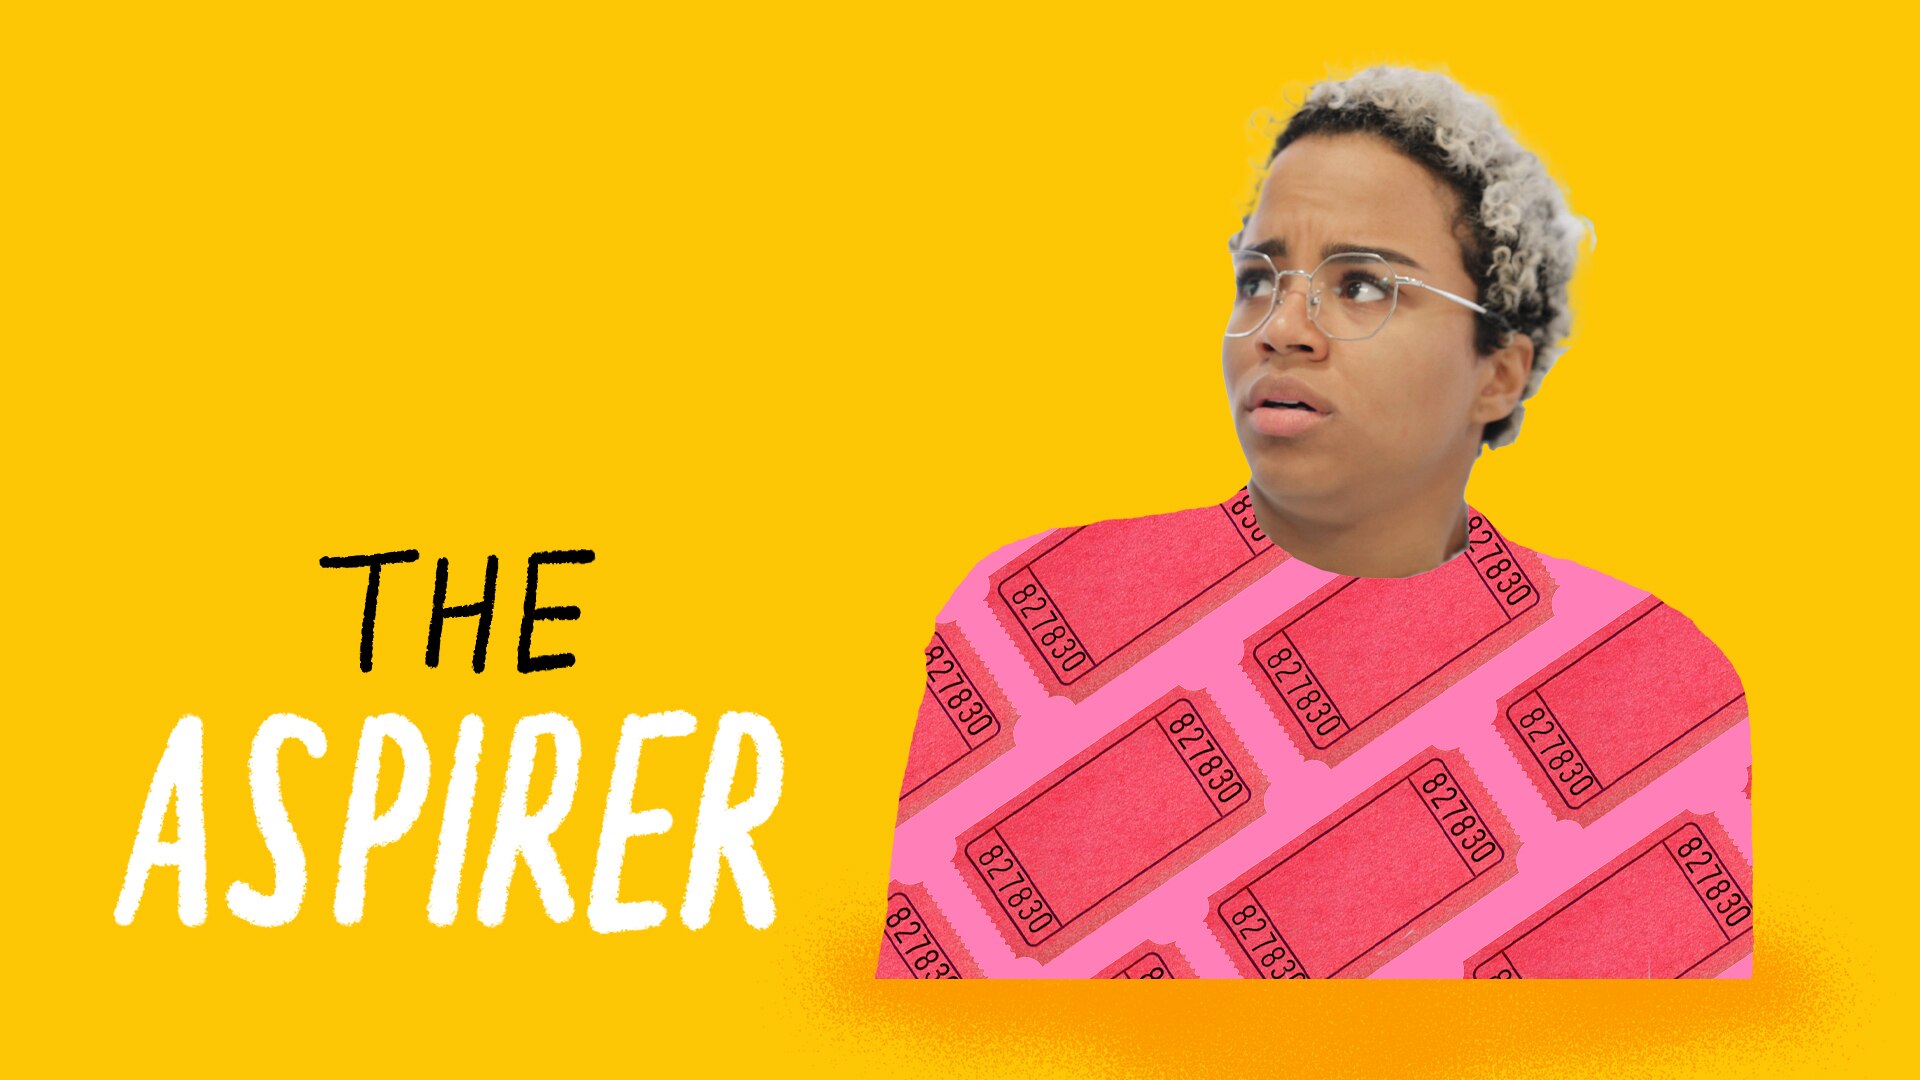 Subhead title: The Aspirer. Yellow background, woman with pink top covered looks concerned.